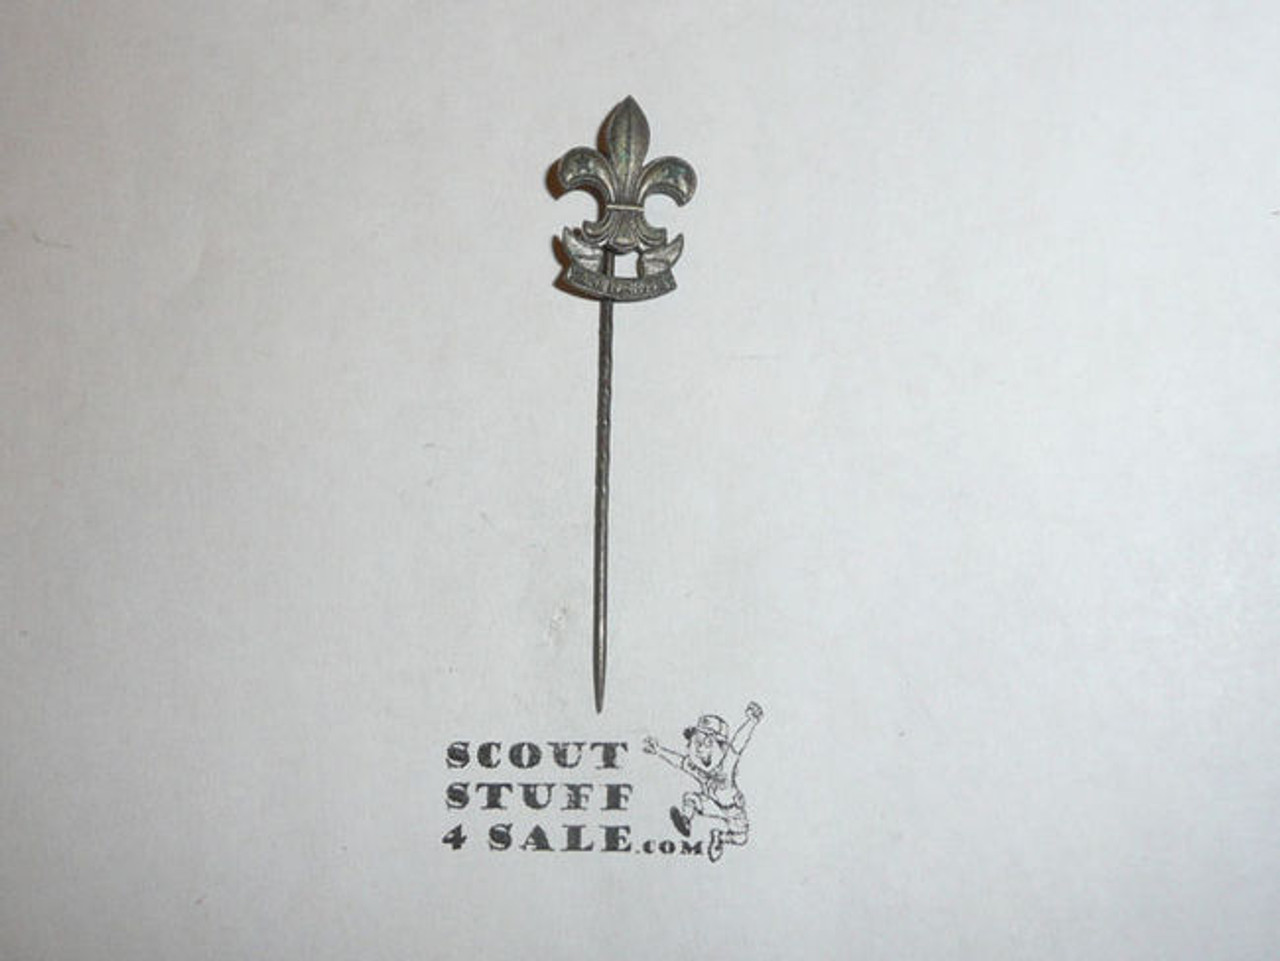 OLD Norway Boy Scout Stick Pin traded for at the 1933 World Jamboree, BPCN2